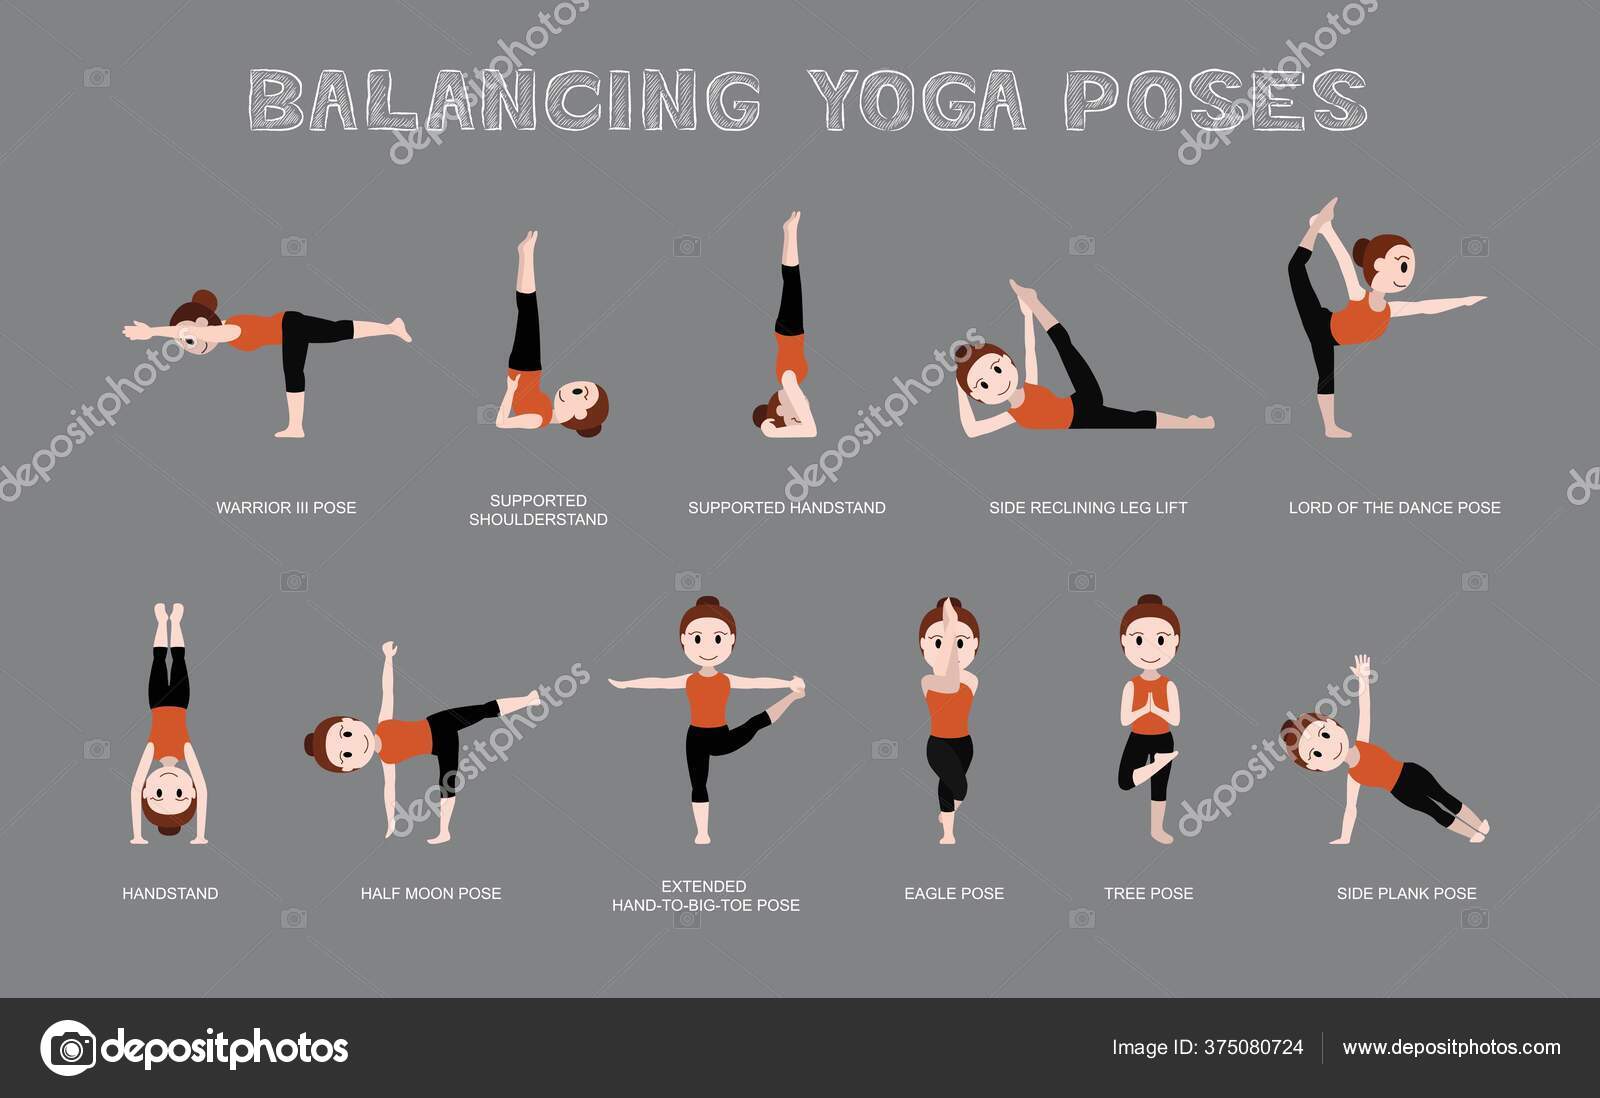 Yoga postures which require balancing on legs | Prana Yoga